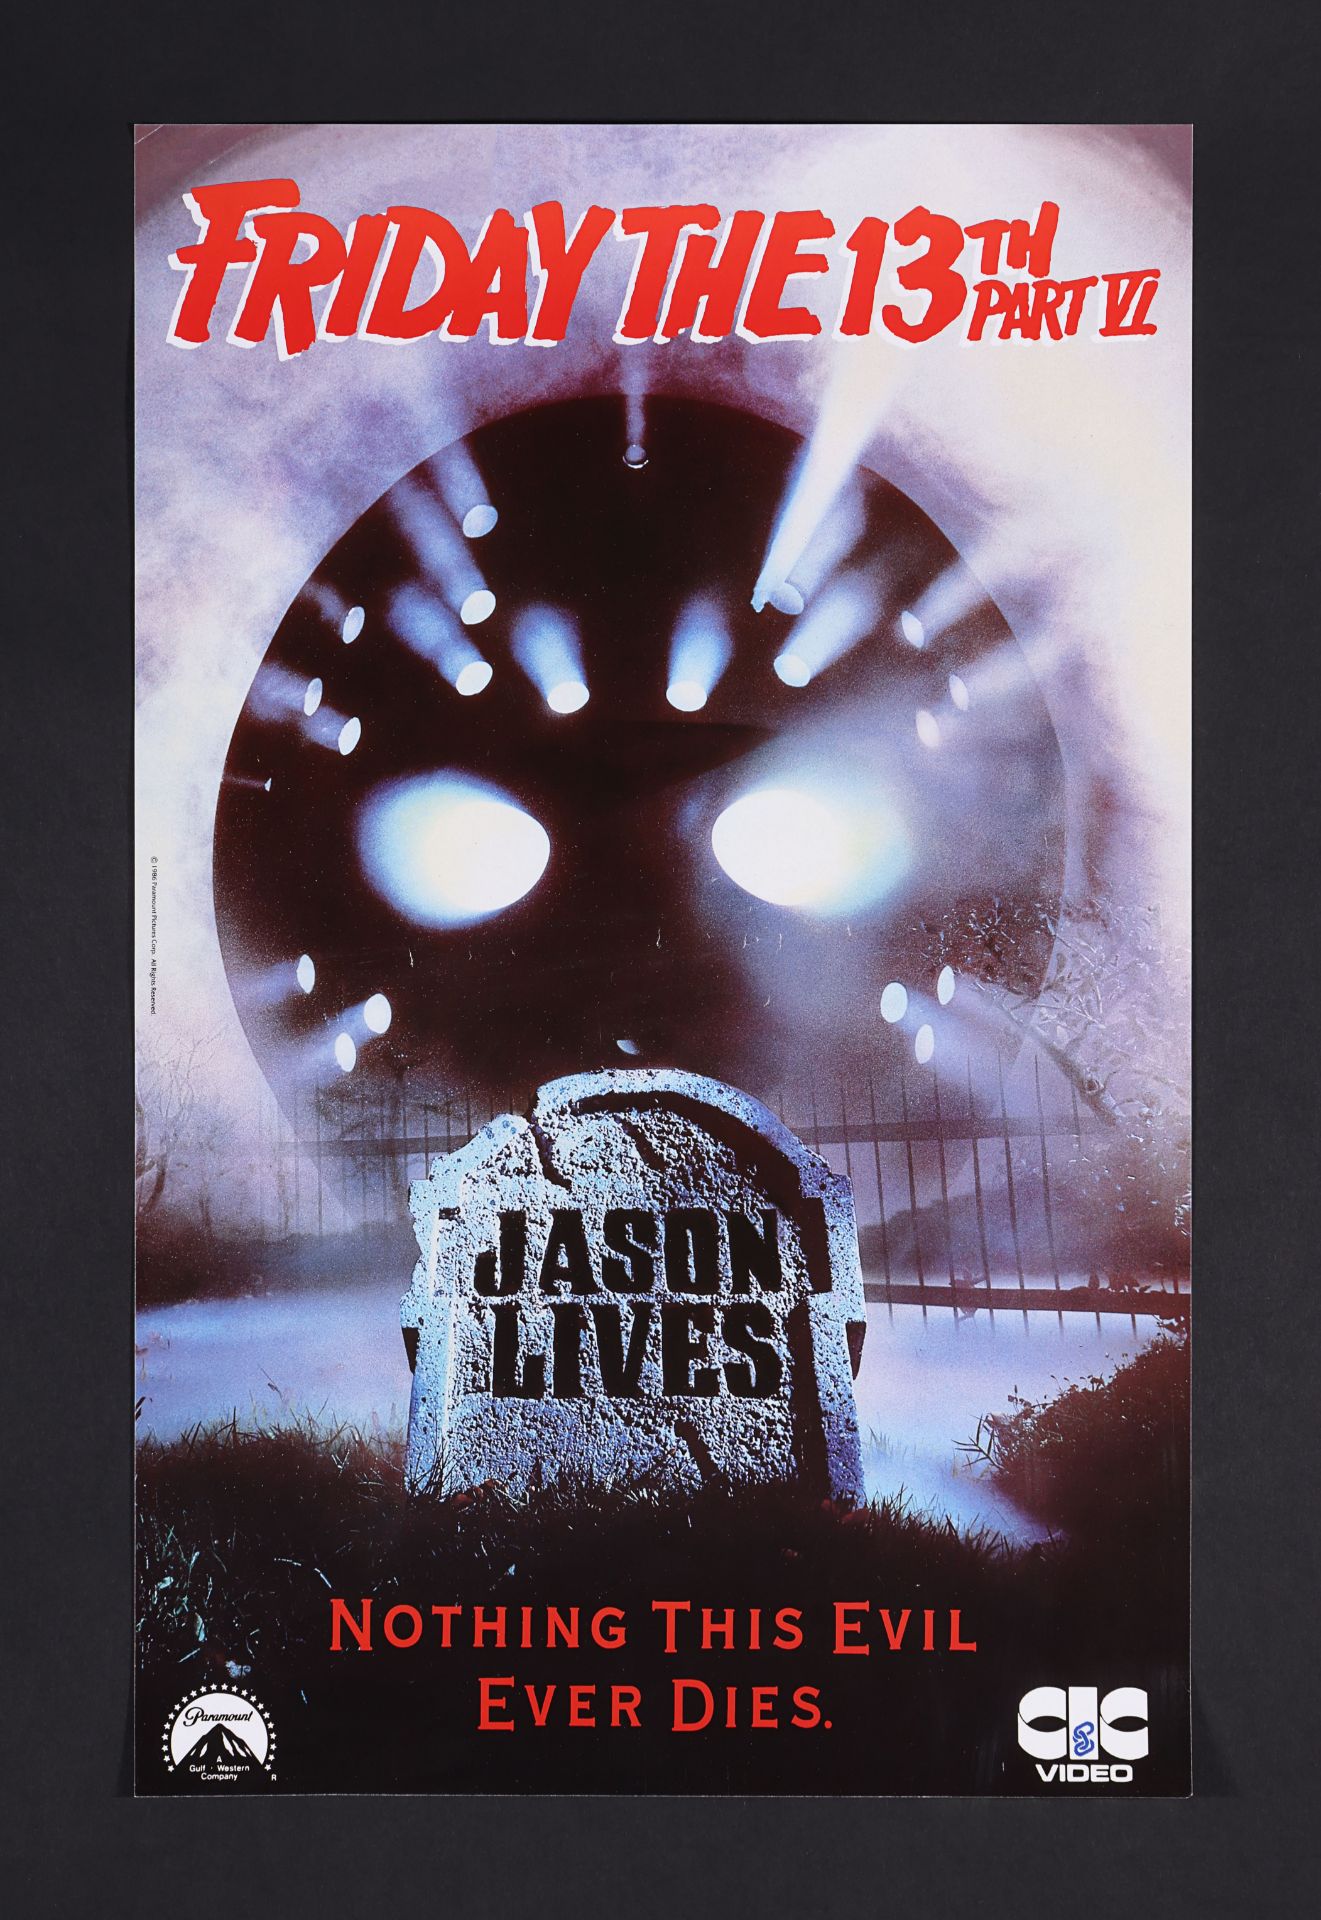 FRIDAY THE 13TH: VARIOUS PRODUCTIONS (1984 - 1989) - Six UK Video Posters, circa 1985 - 1990 - Image 3 of 6